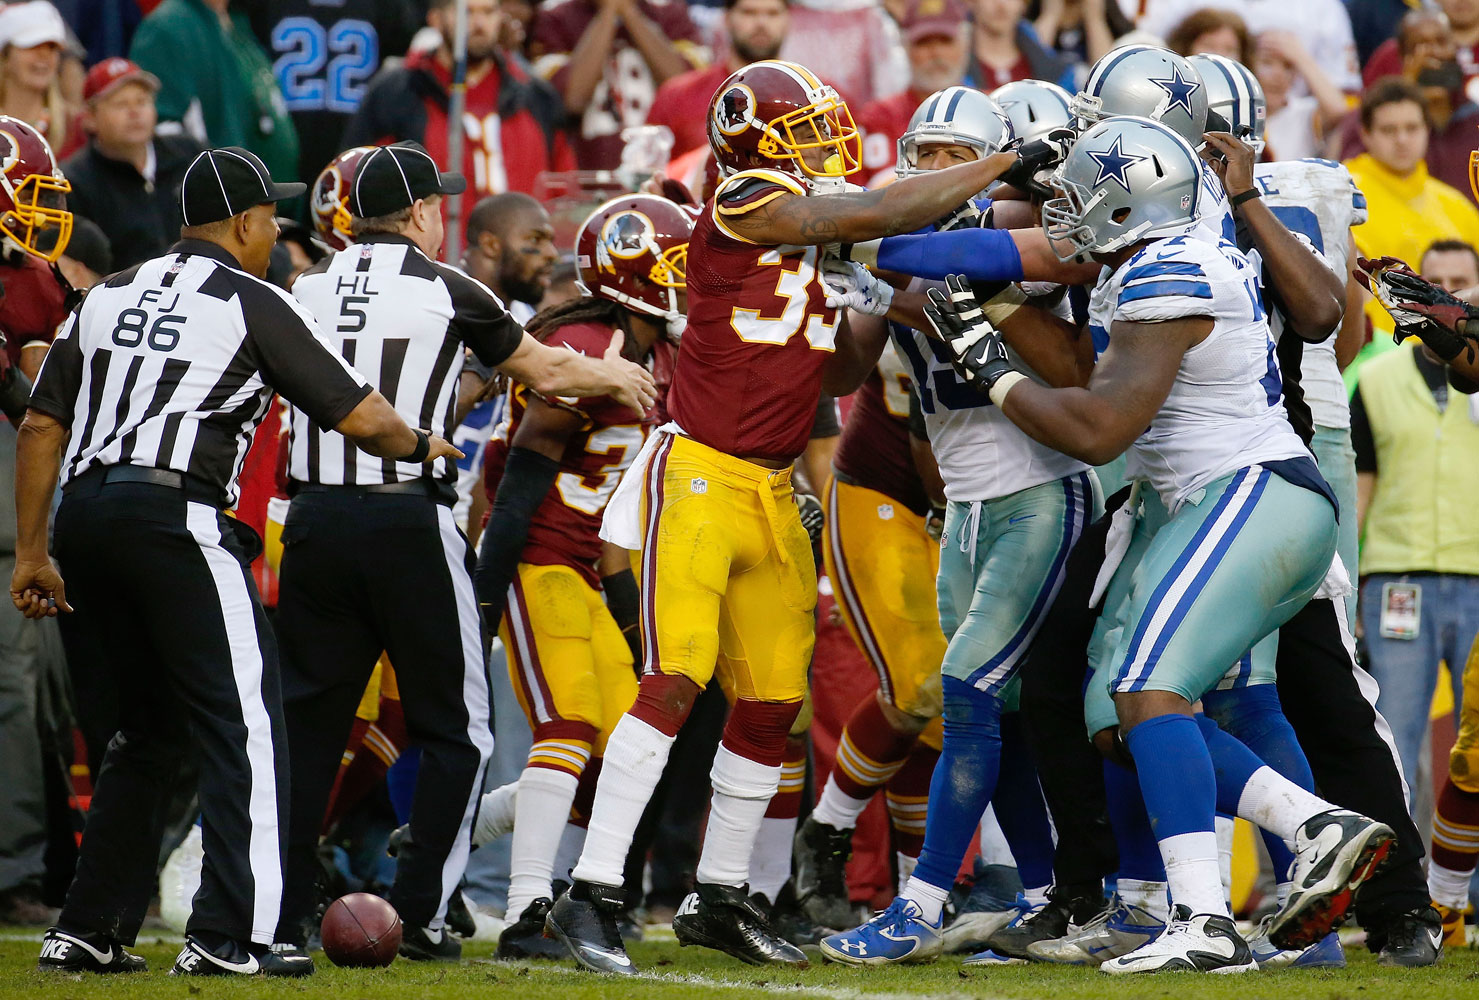 Redskins-Cowboys: A rivalry on life support